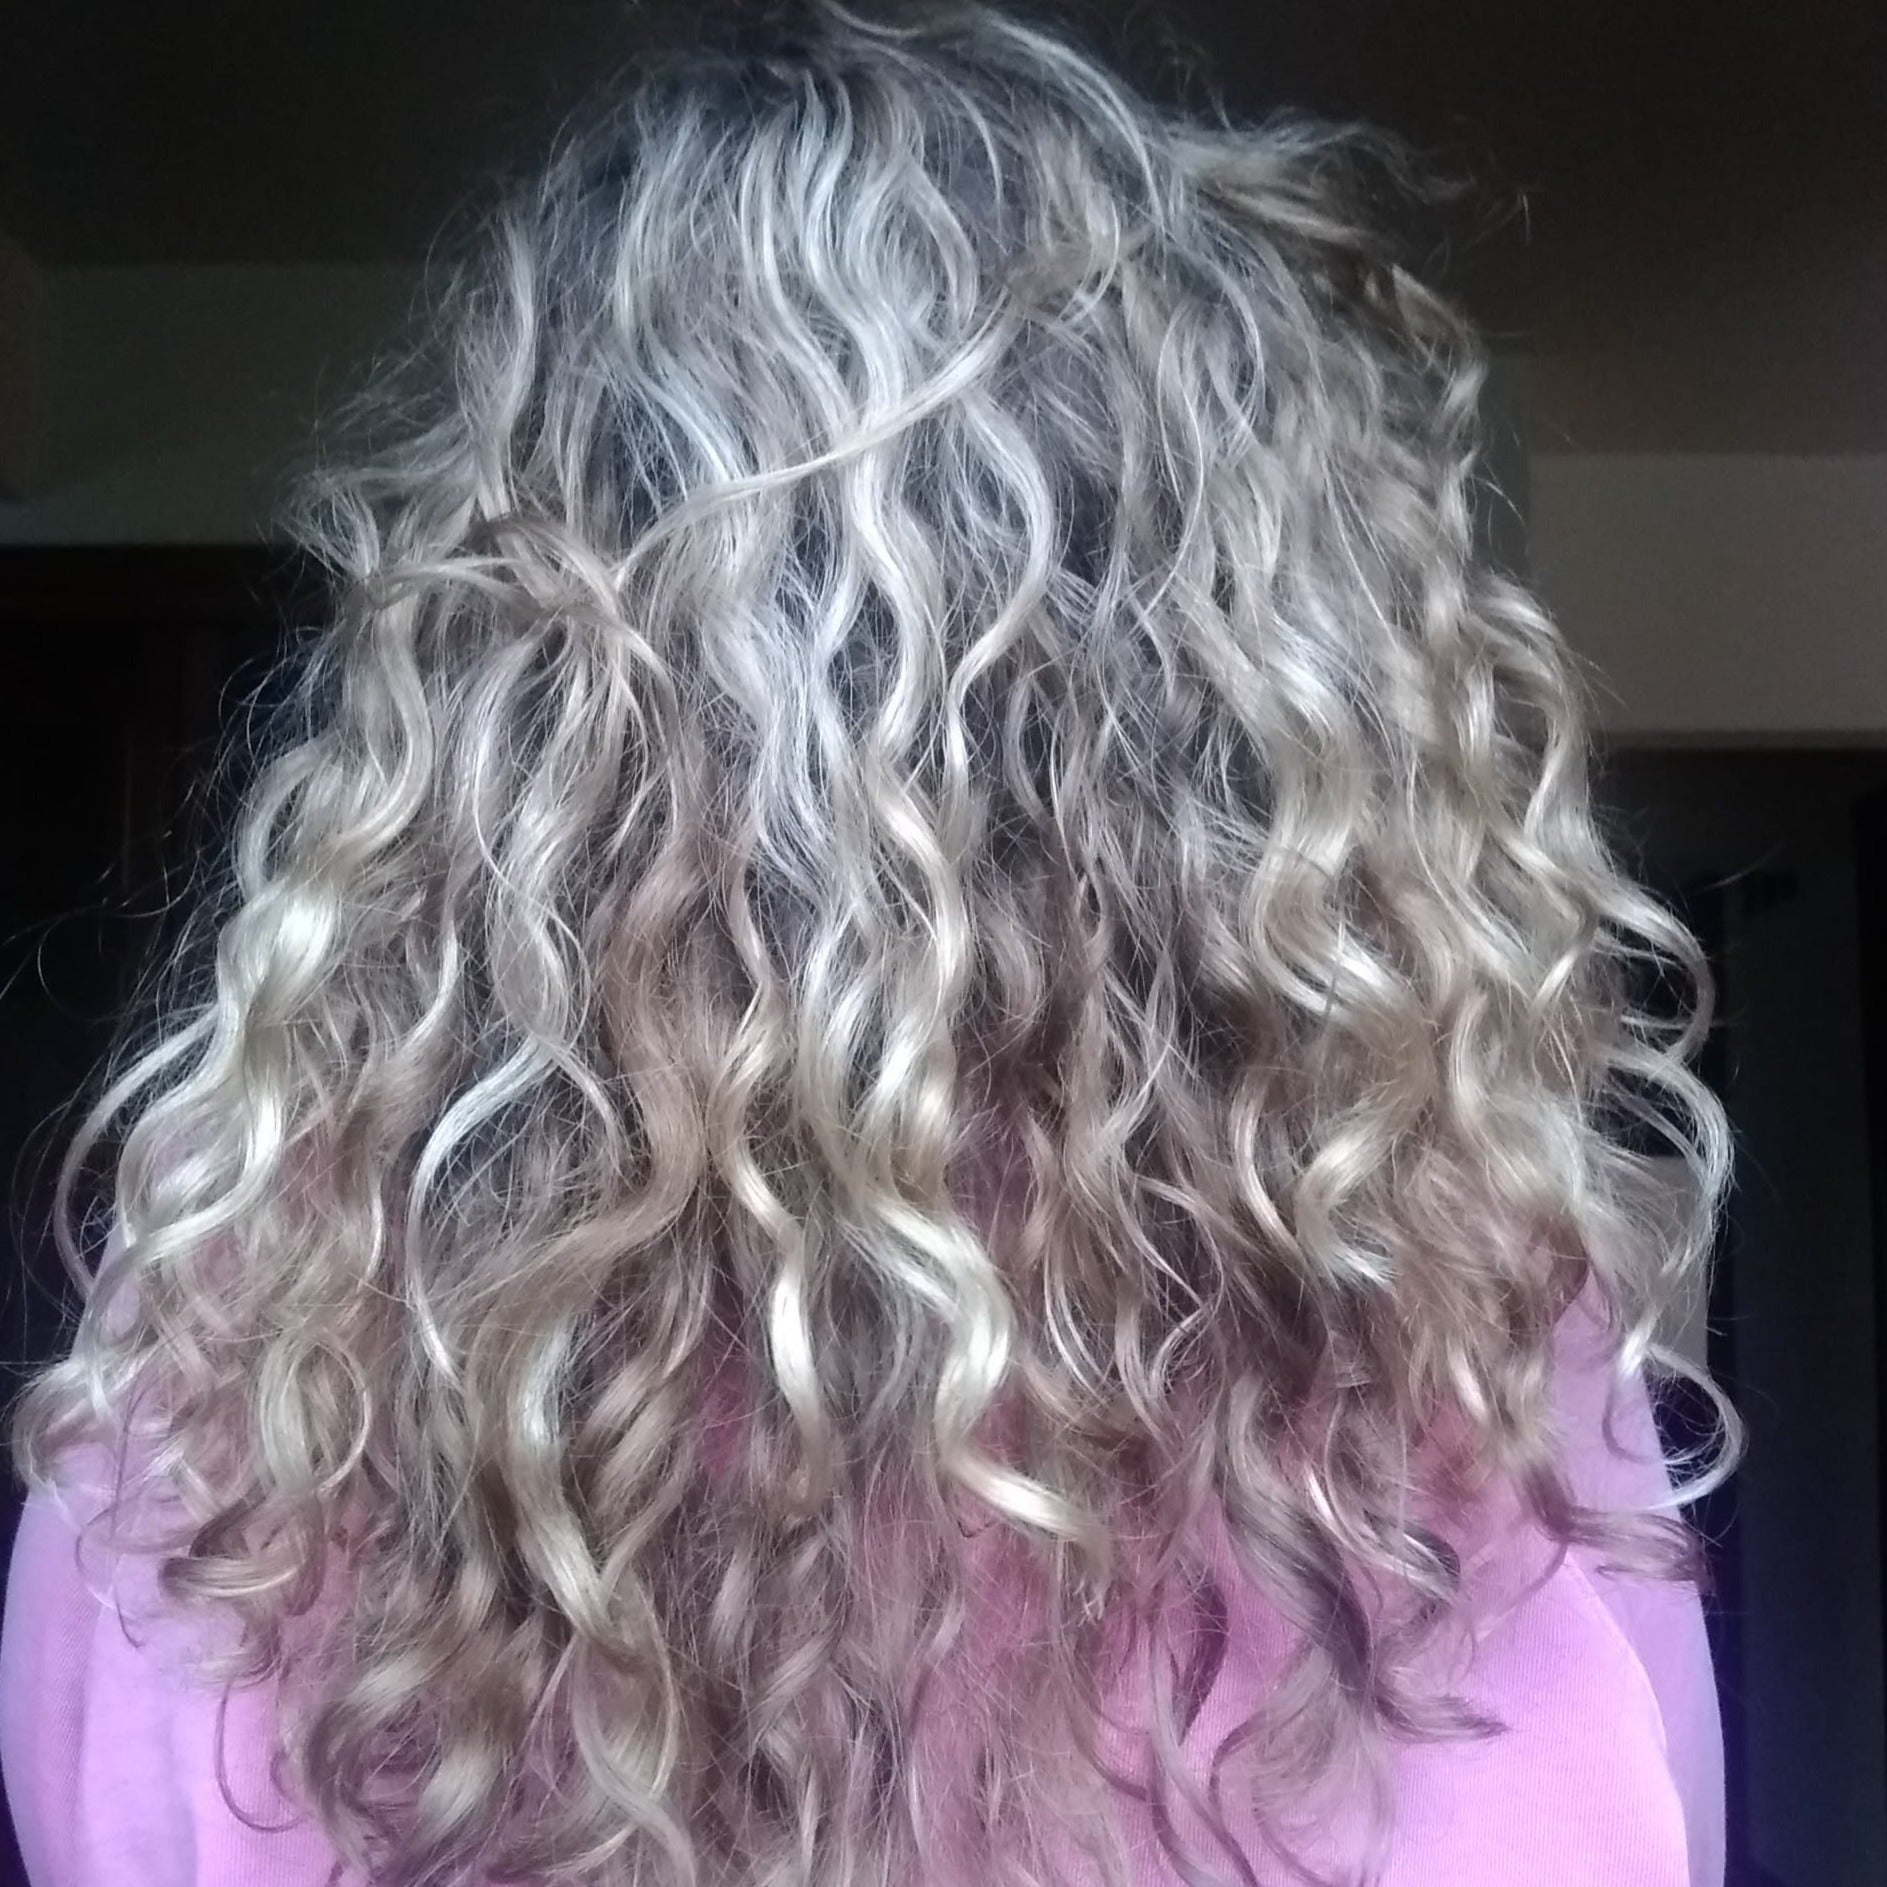 laura's beautiful curly hair after using MadeOn's shampoo bar